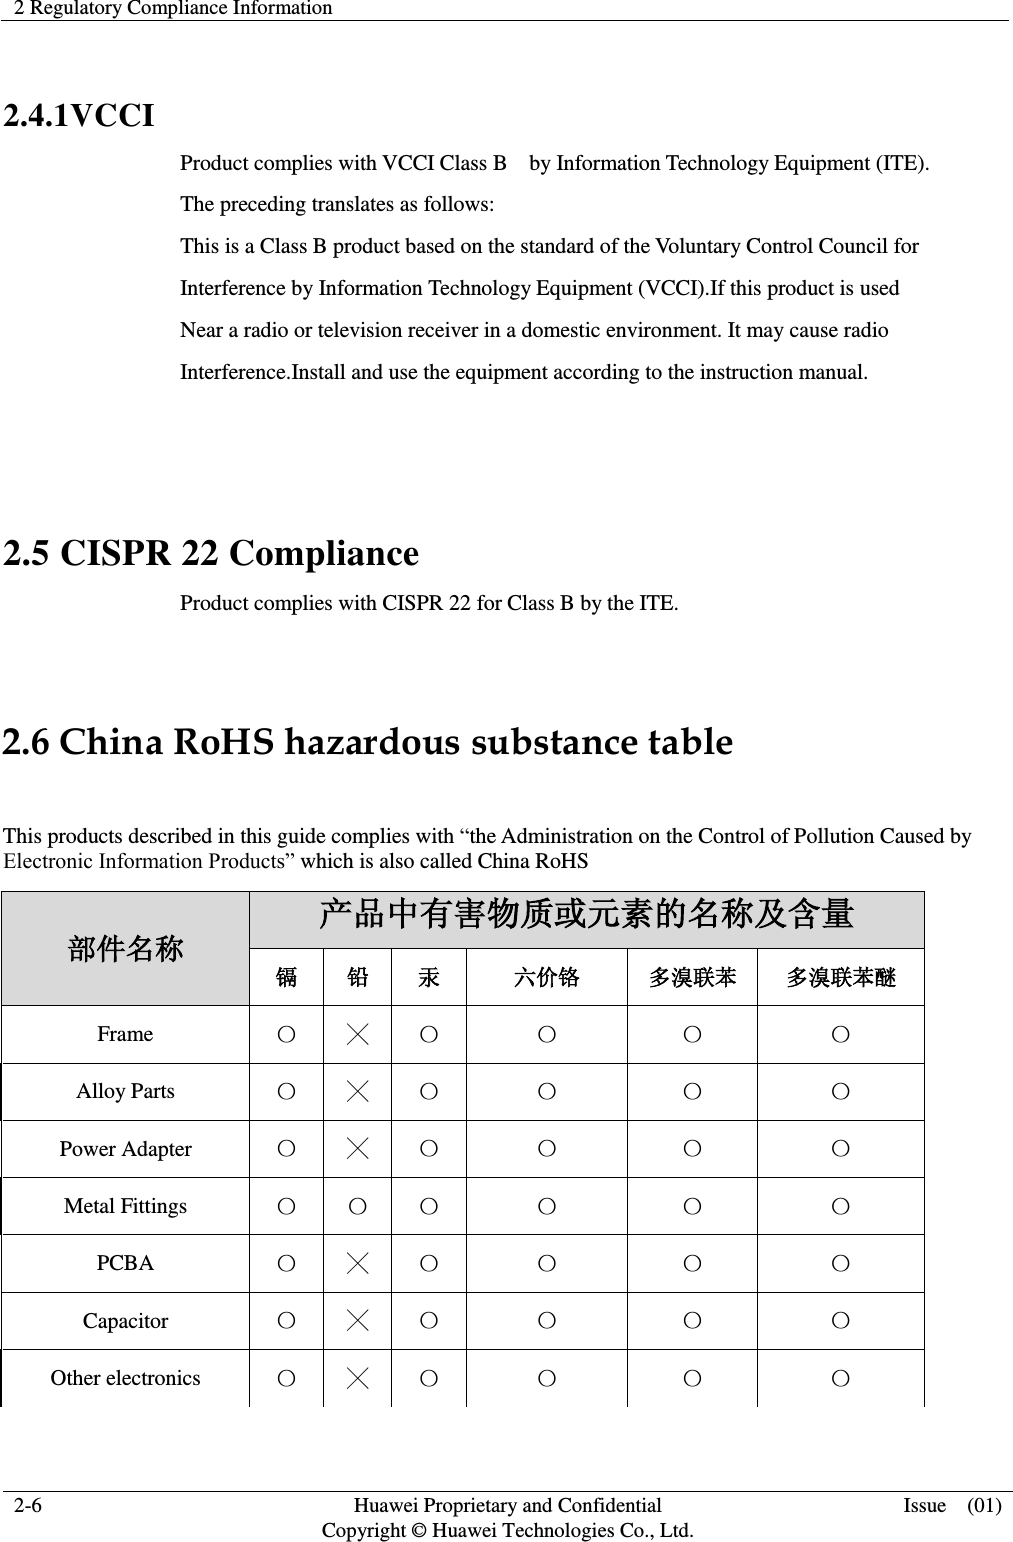 2 Regulatory Compliance Information    2-6 Huawei Proprietary and Confidential                                     Copyright © Huawei Technologies Co., Ltd. Issue    (01)   2.4.1VCCI Product complies with VCCI Class B    by Information Technology Equipment (ITE). The preceding translates as follows: This is a Class B product based on the standard of the Voluntary Control Council for Interference by Information Technology Equipment (VCCI).If this product is used Near a radio or television receiver in a domestic environment. It may cause radio Interference.Install and use the equipment according to the instruction manual.   2.5 CISPR 22 Compliance Product complies with CISPR 22 for Class B by the ITE.  2.6 China RoHS hazardous substance table  This products described in this guide complies with “the Administration on the Control of Pollution Caused by Electronic Information Products” which is also called China RoHS 部件名称 产品中有害物质或元素的名称及含量 镉 铅 汞 六价铬 多溴联苯 多溴联苯醚 Frame 〇 ╳ 〇 〇 〇 〇 Alloy Parts 〇 ╳ 〇 〇 〇 〇 Power Adapter 〇 ╳ 〇 〇 〇 〇 Metal Fittings 〇 〇 〇 〇 〇 〇 PCBA 〇 ╳ 〇 〇 〇 〇 Capacitor 〇 ╳ 〇 〇 〇 〇 Other electronics 〇 ╳ 〇 〇 〇 〇 